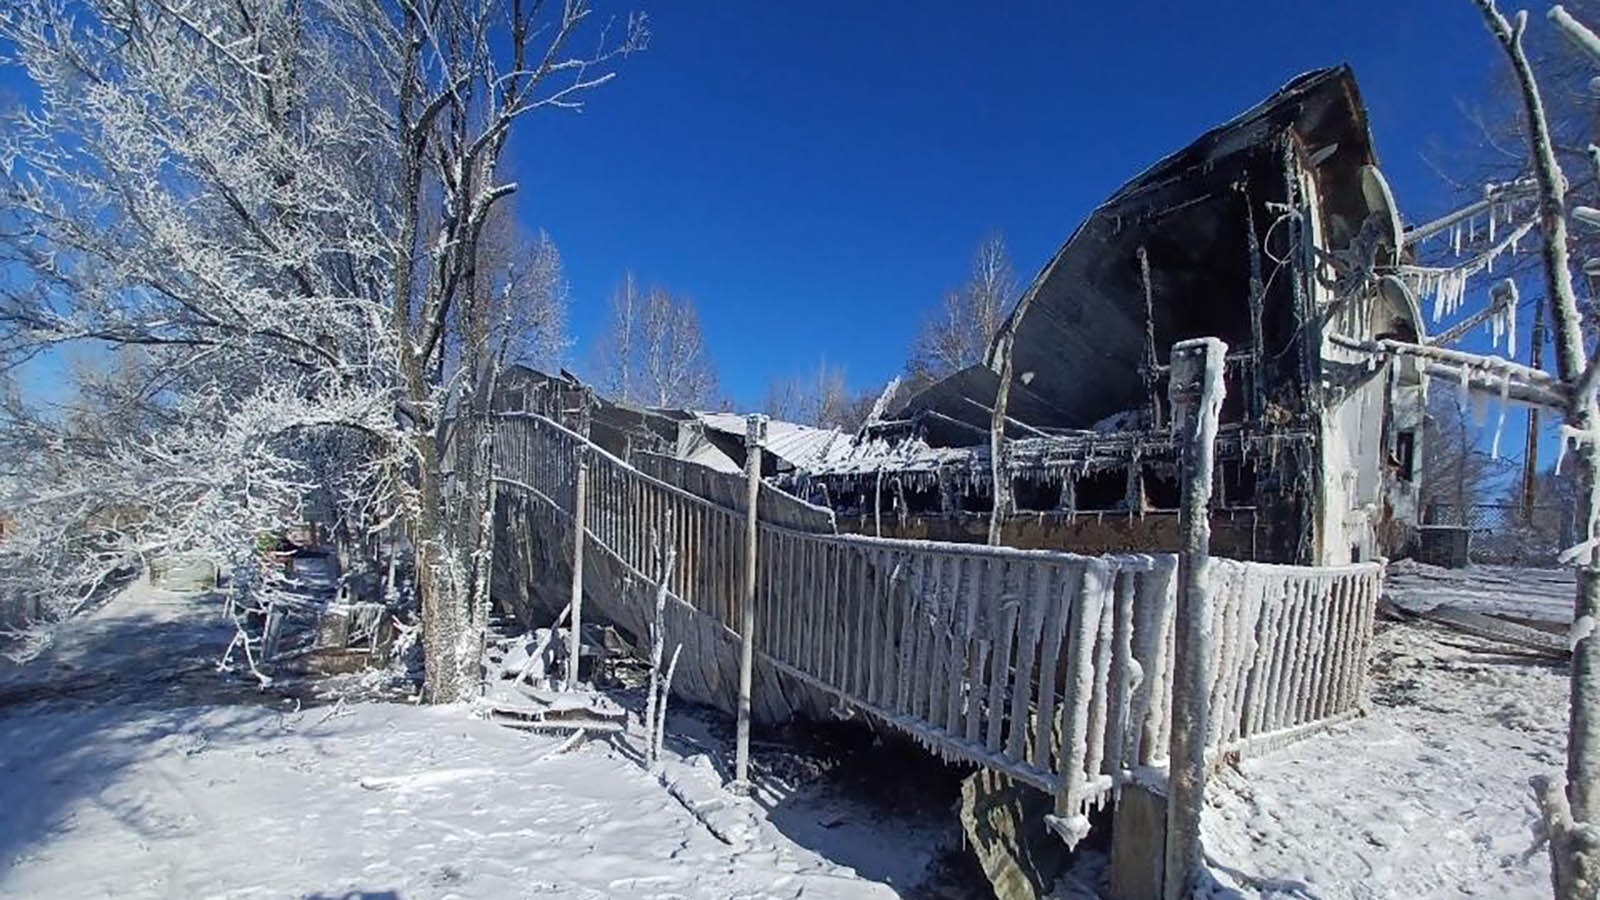 The charred remains of the Watts family home in Hudson, Wyoming, the day after it burned.